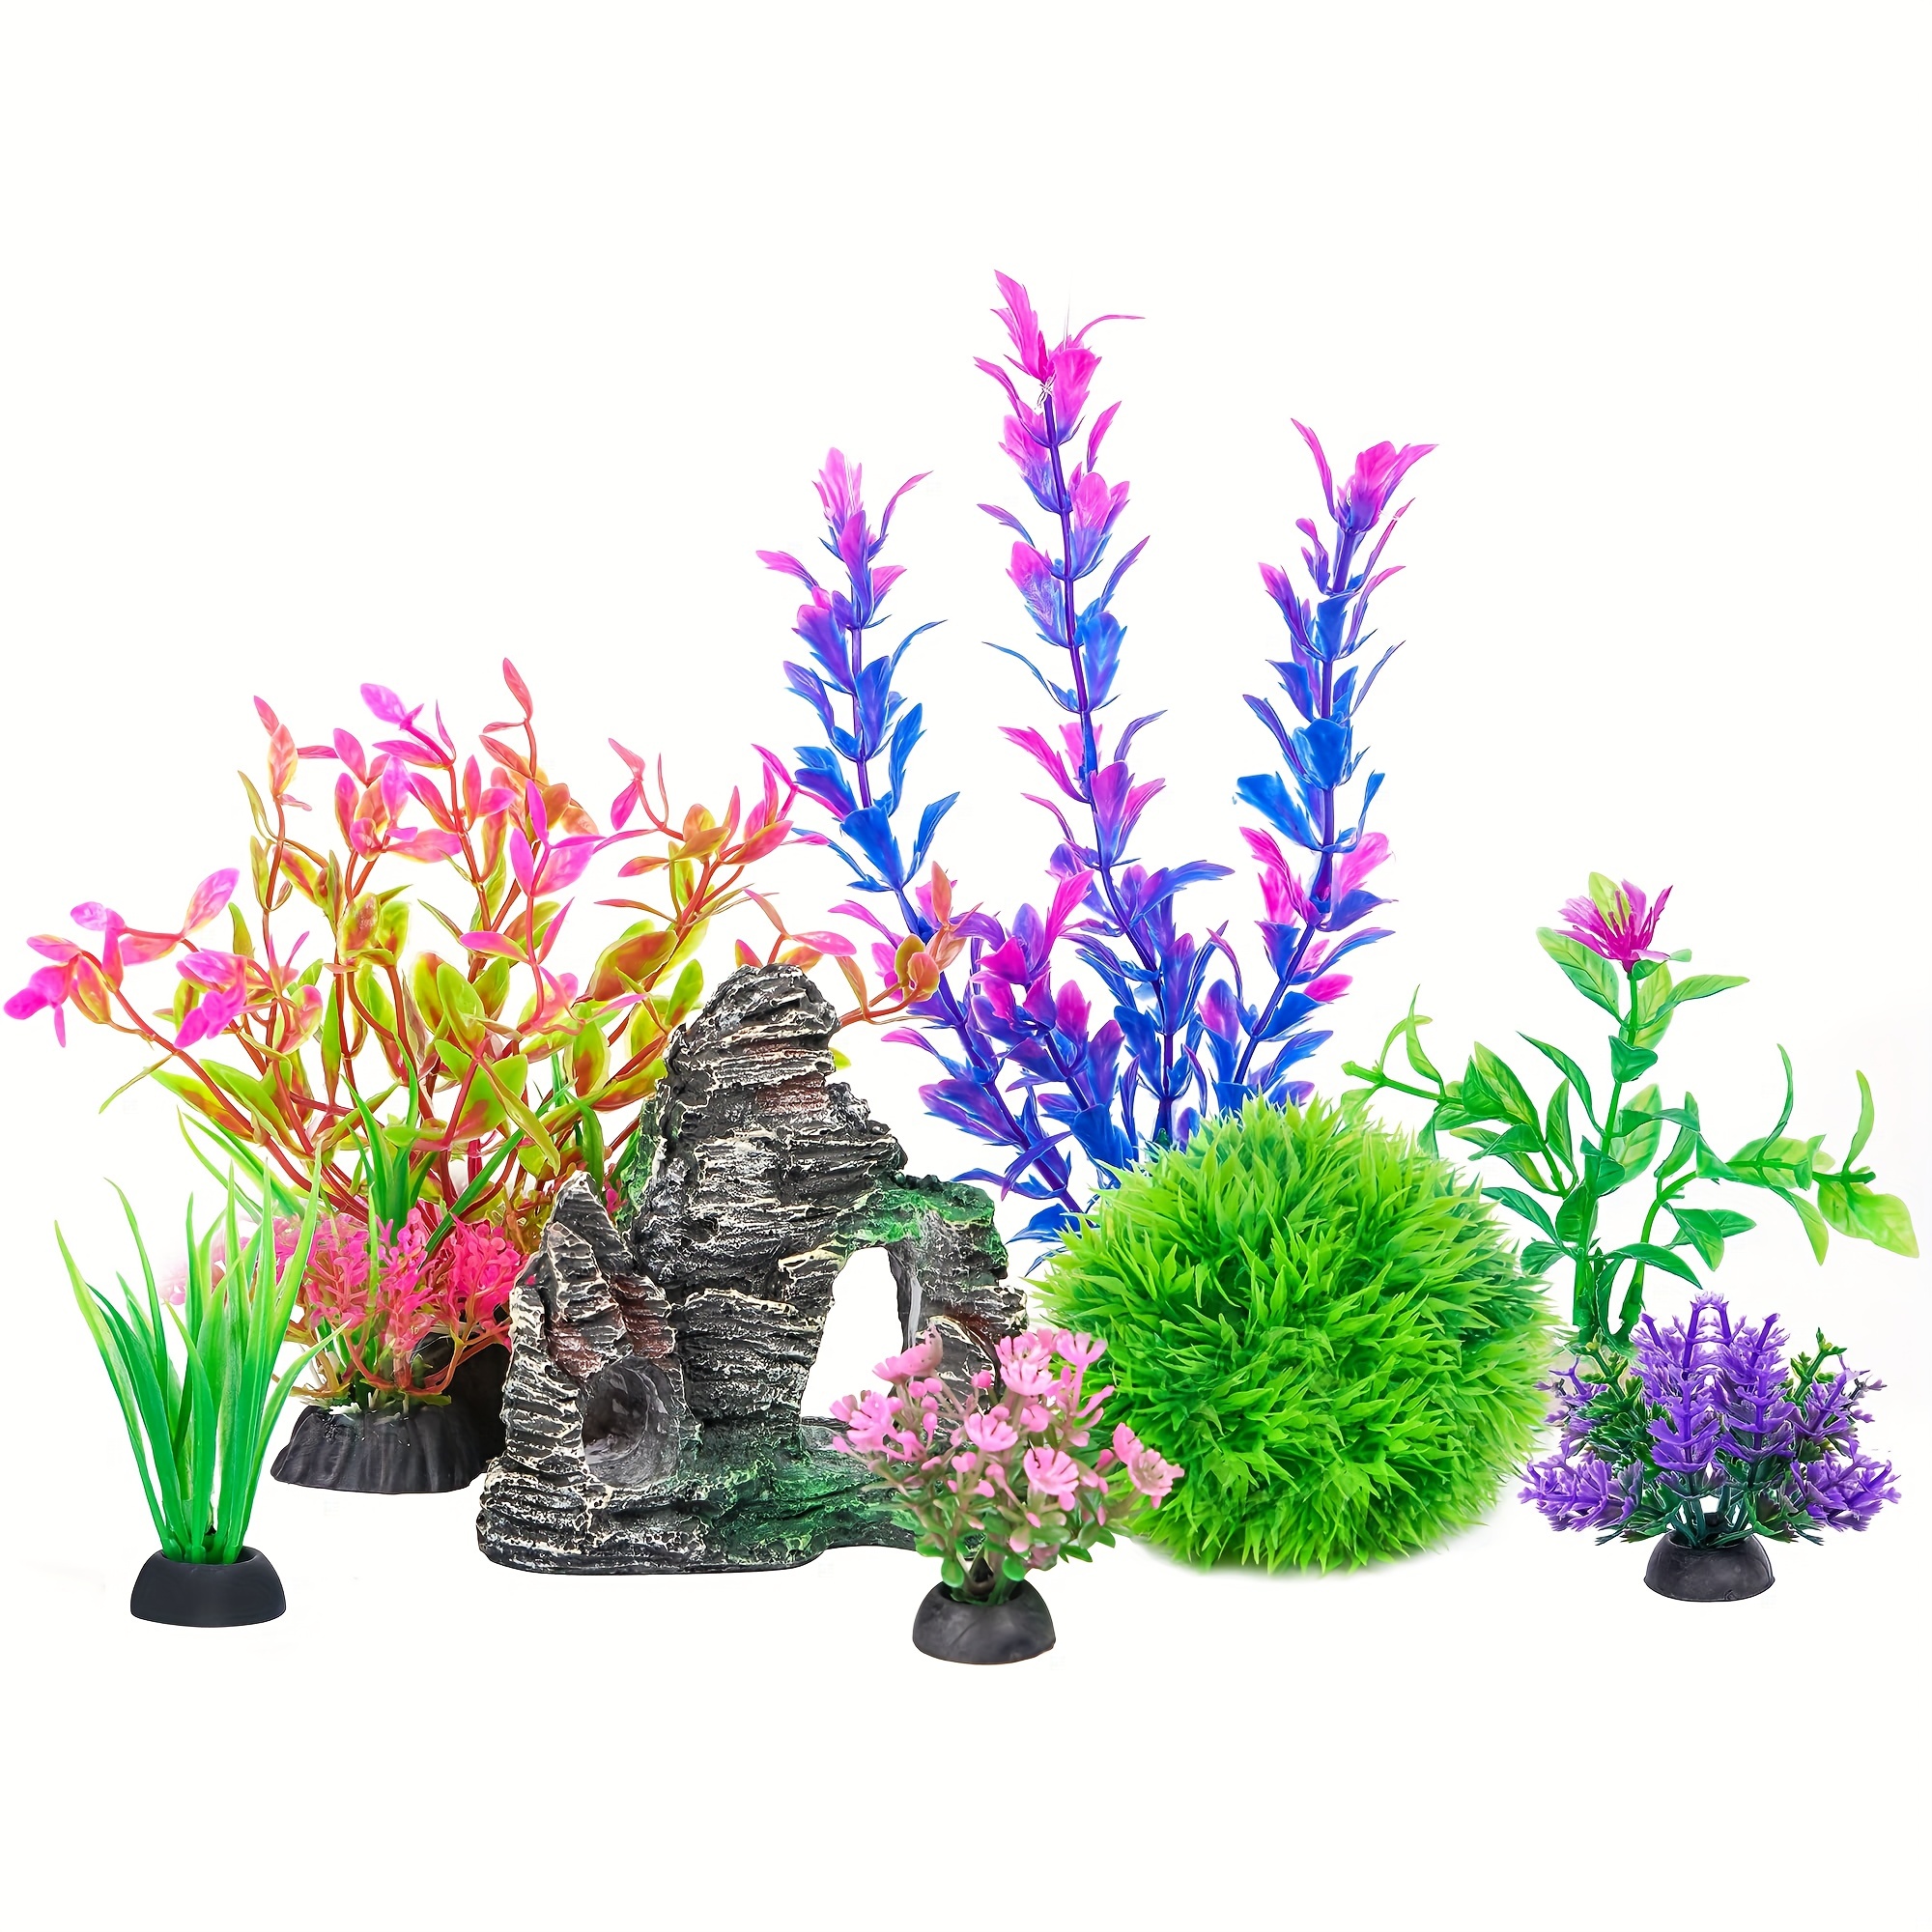 1pc Plastic Fish Tank Portable Fish Bowl With Artificial Aquatic Plants,  Stones, Ribbons And Small Lamps Without Batteries, Don't Miss These Great  Deals